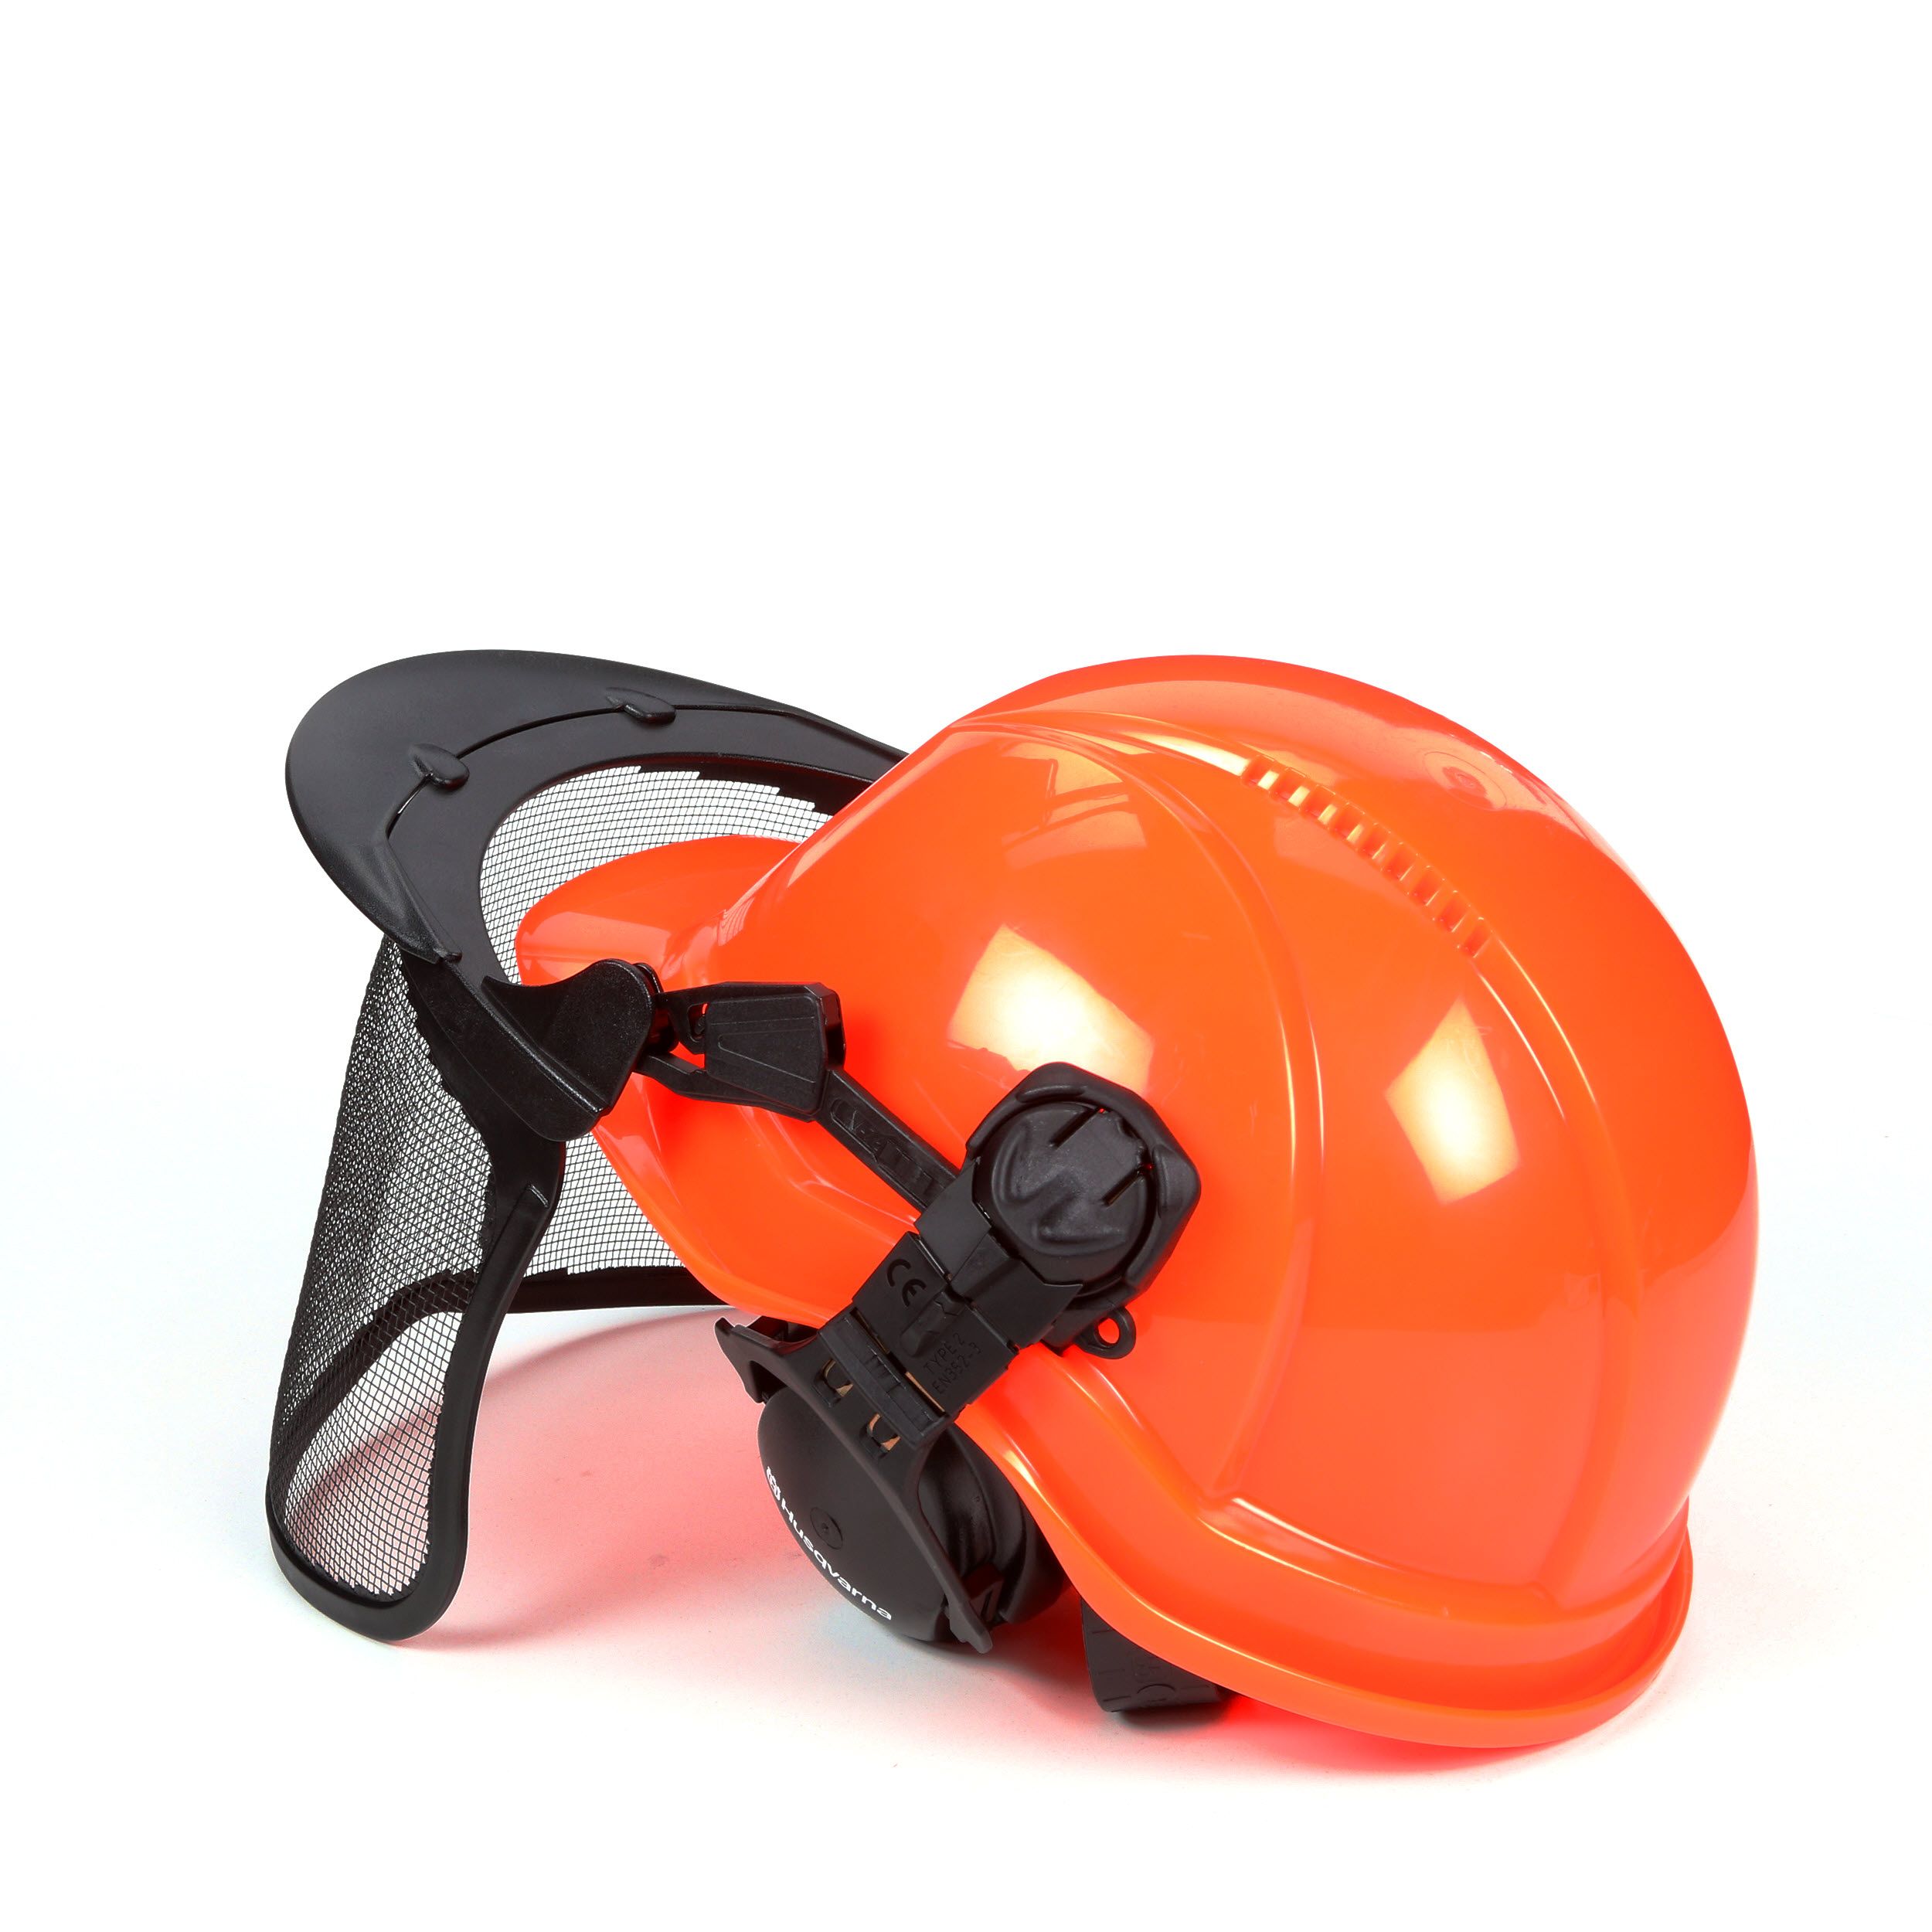 New Chainsaw Helmet Hard Hat Face Guard Ear Defenders Safety CH011 